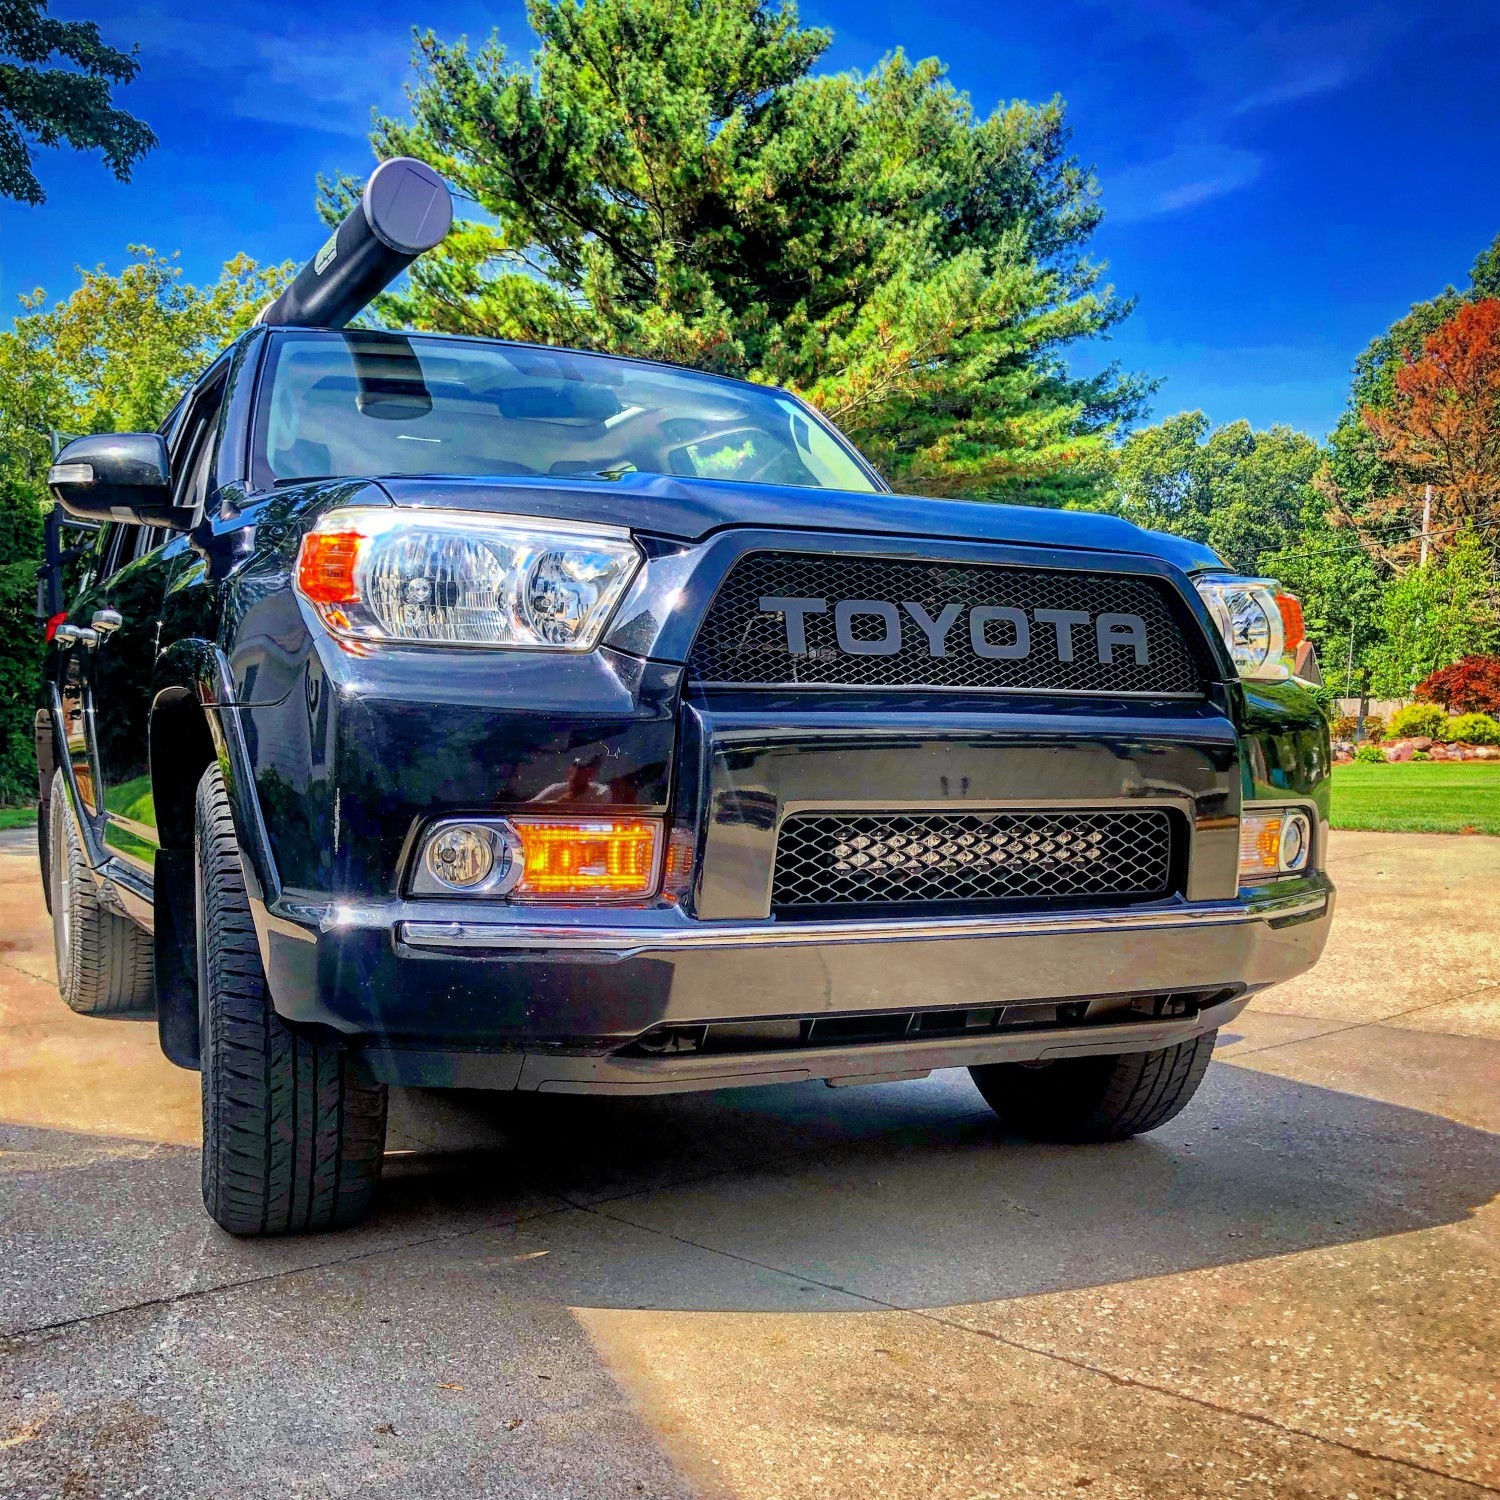 2010 - 2013 Toyota 4Runner Grill Mesh and Big Letters #2